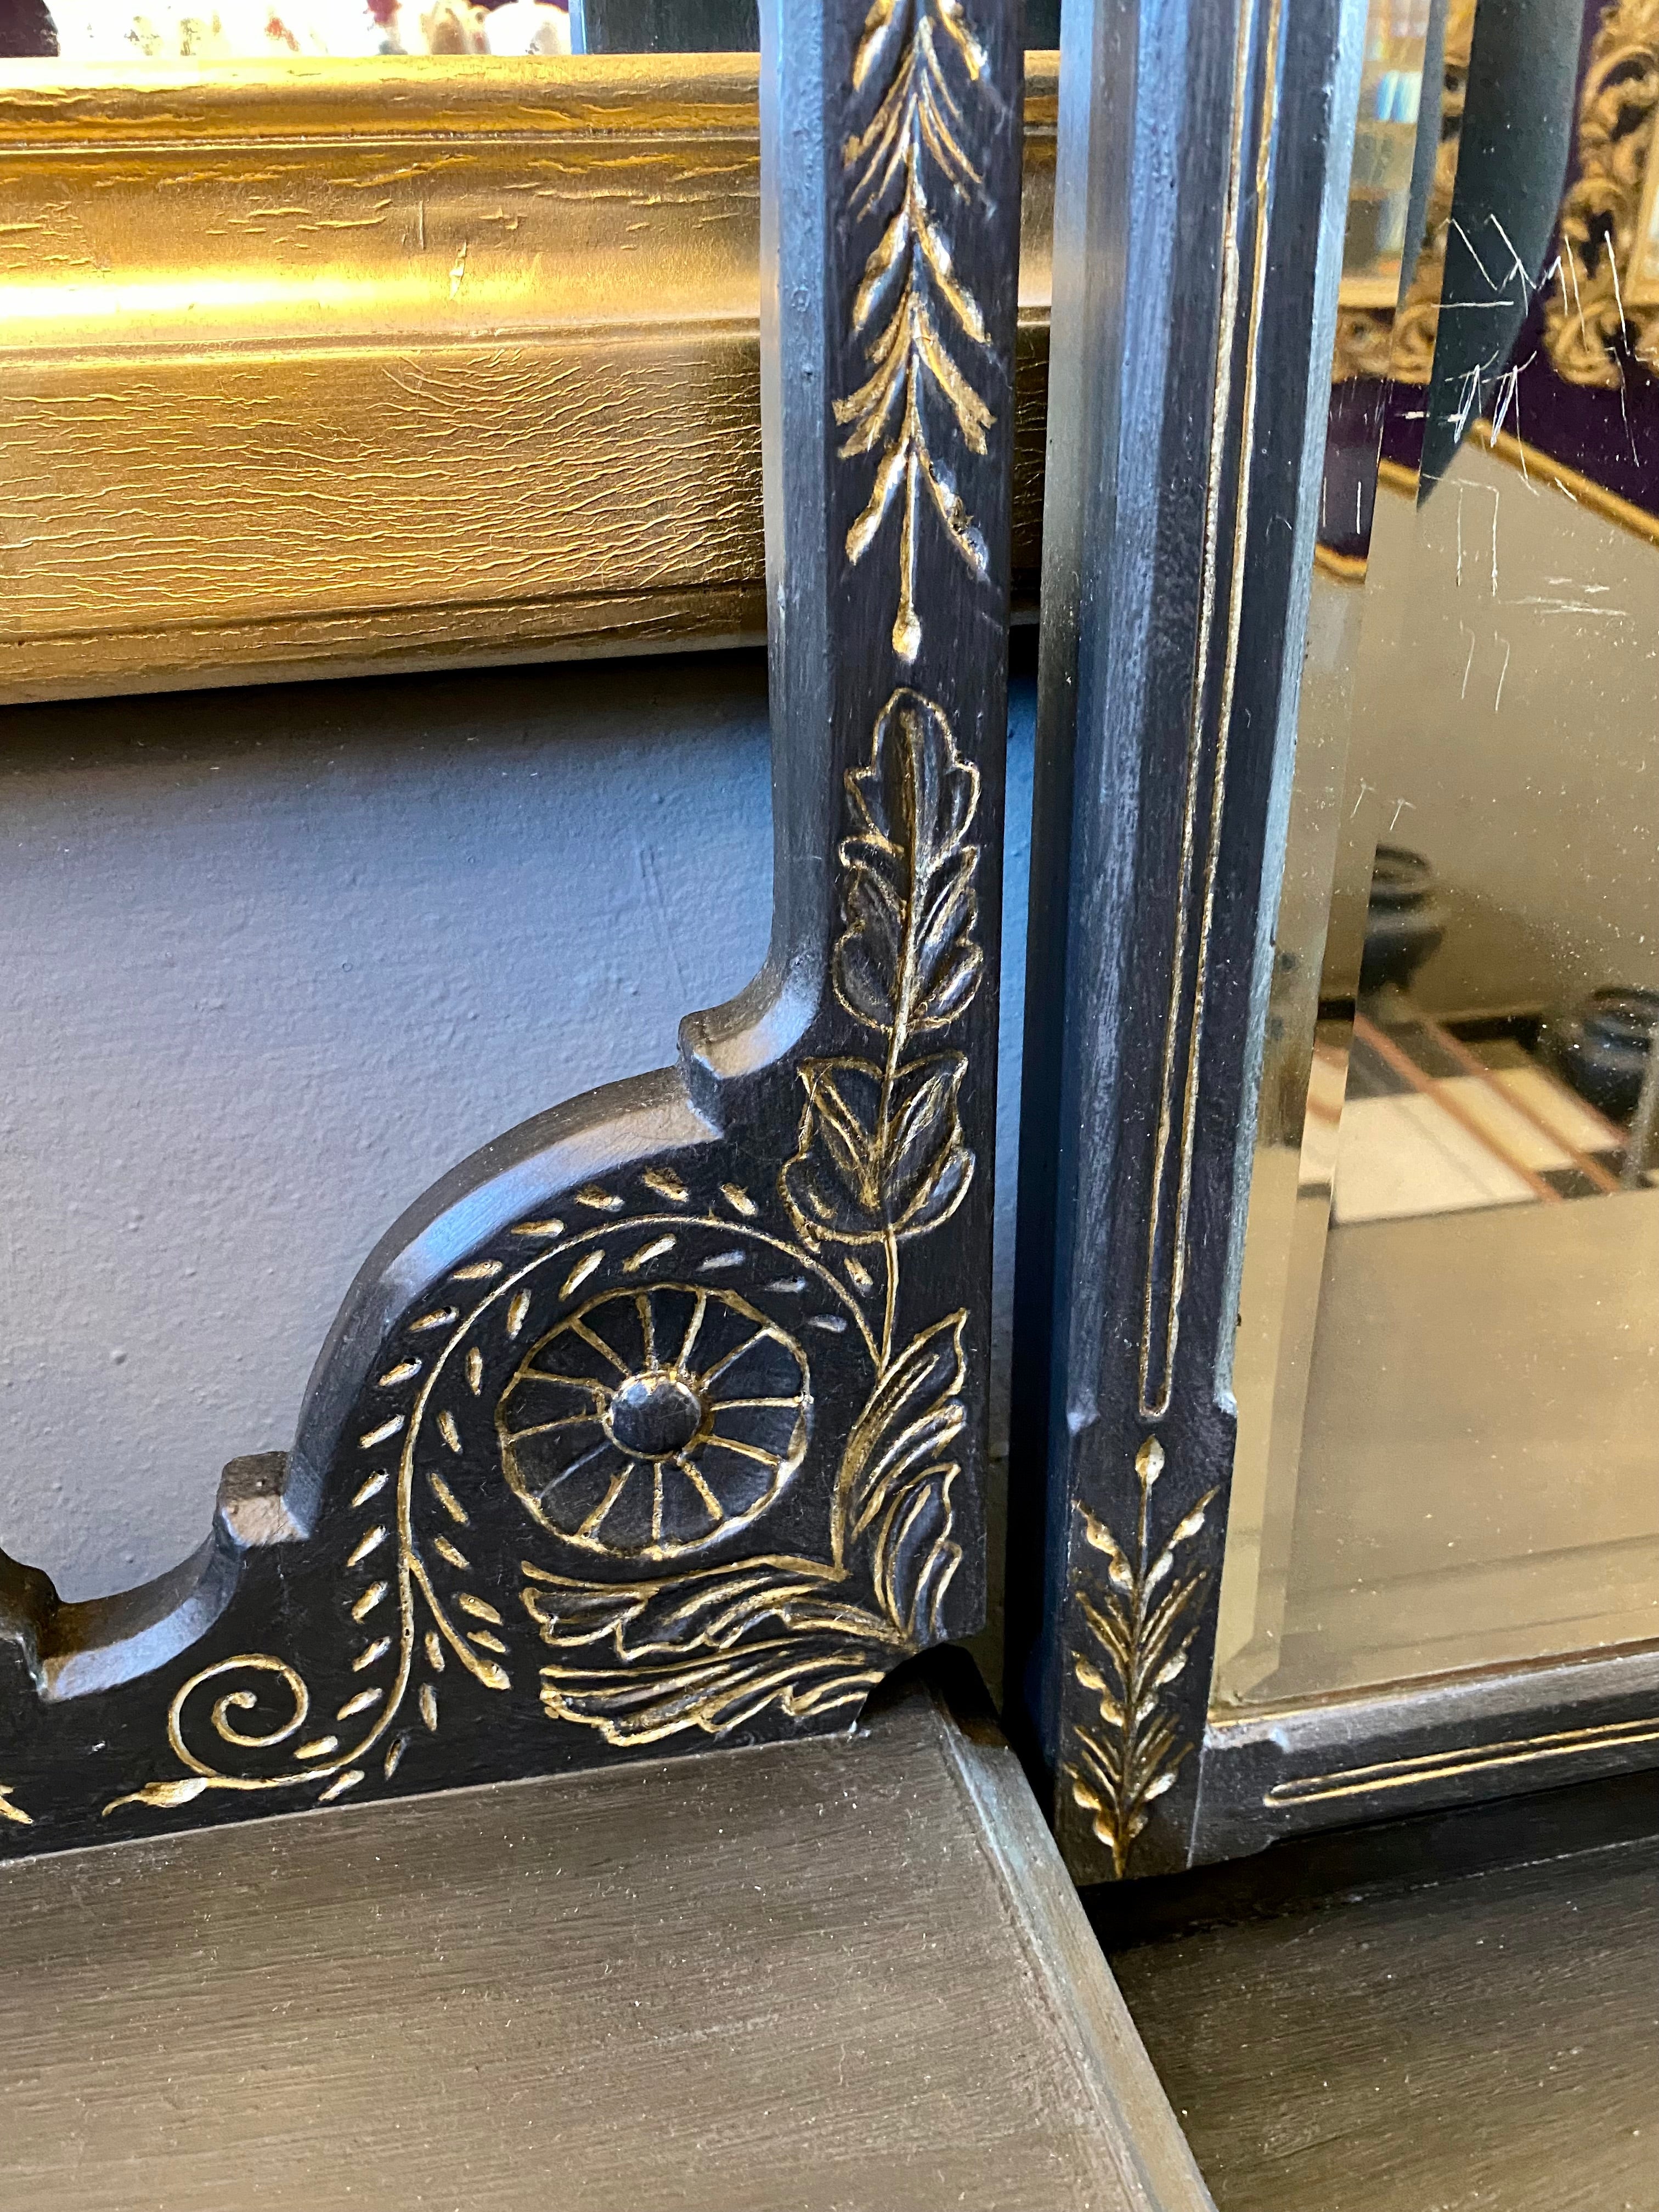 Victorian Dressing Table Painted in a Matte Charcoal Finish